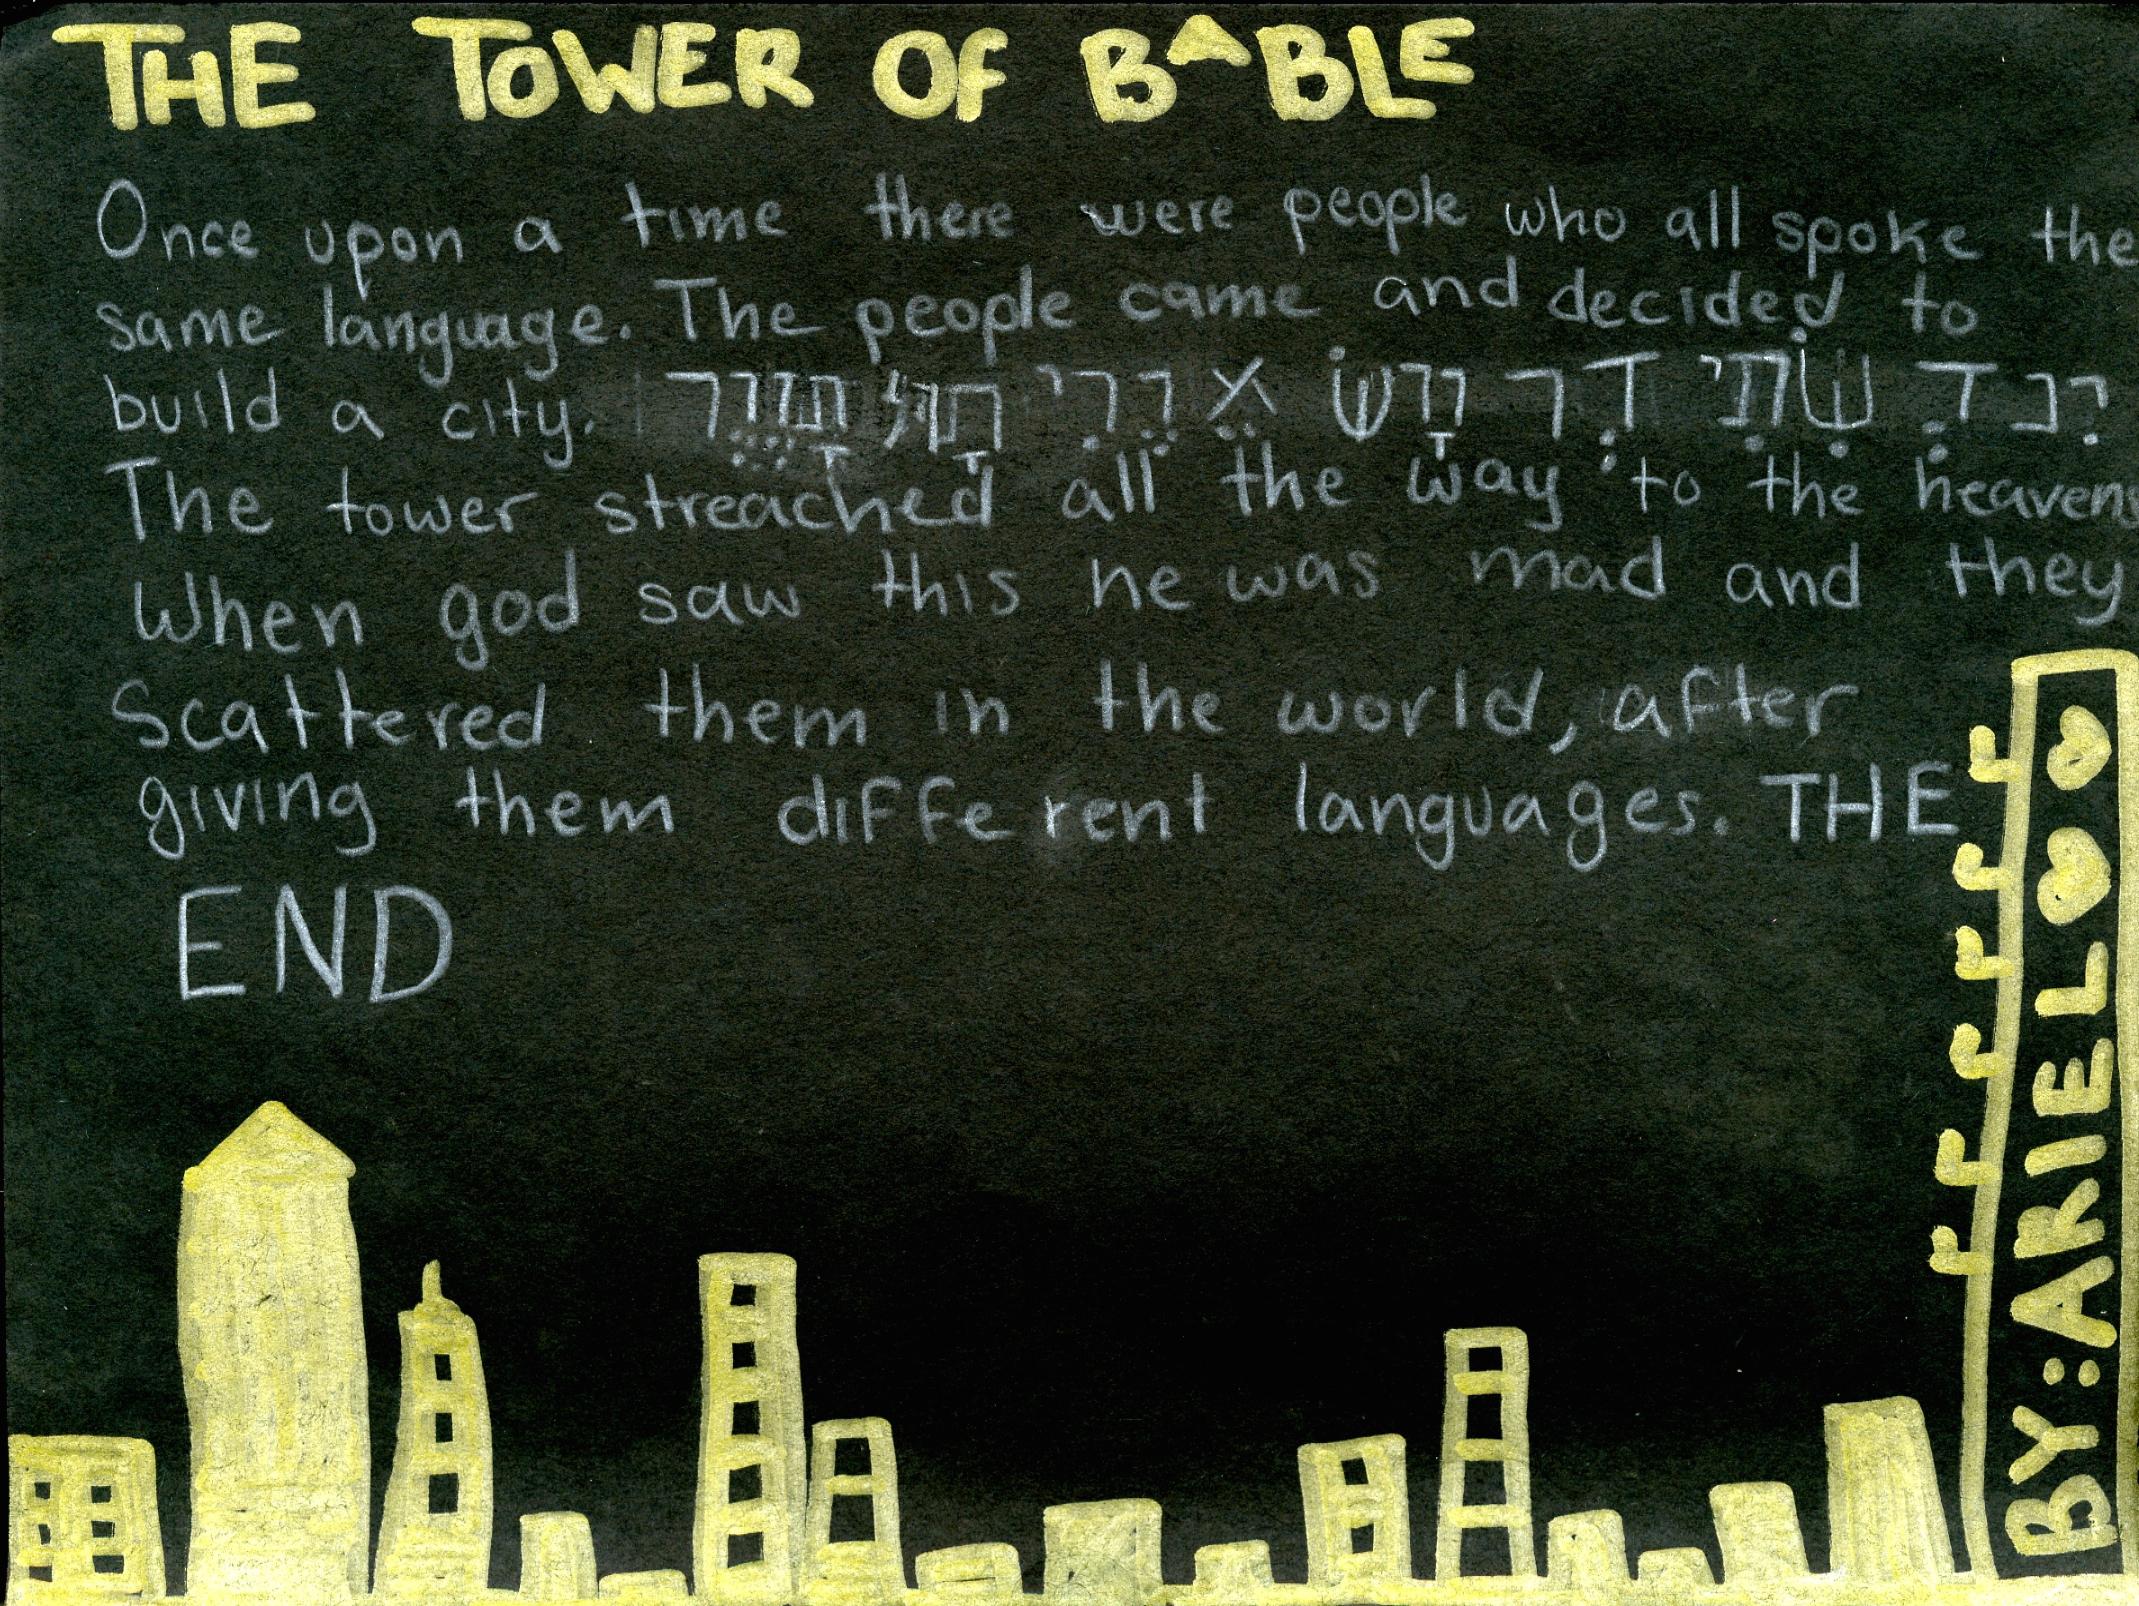 Reconstructing the Tower of Babel